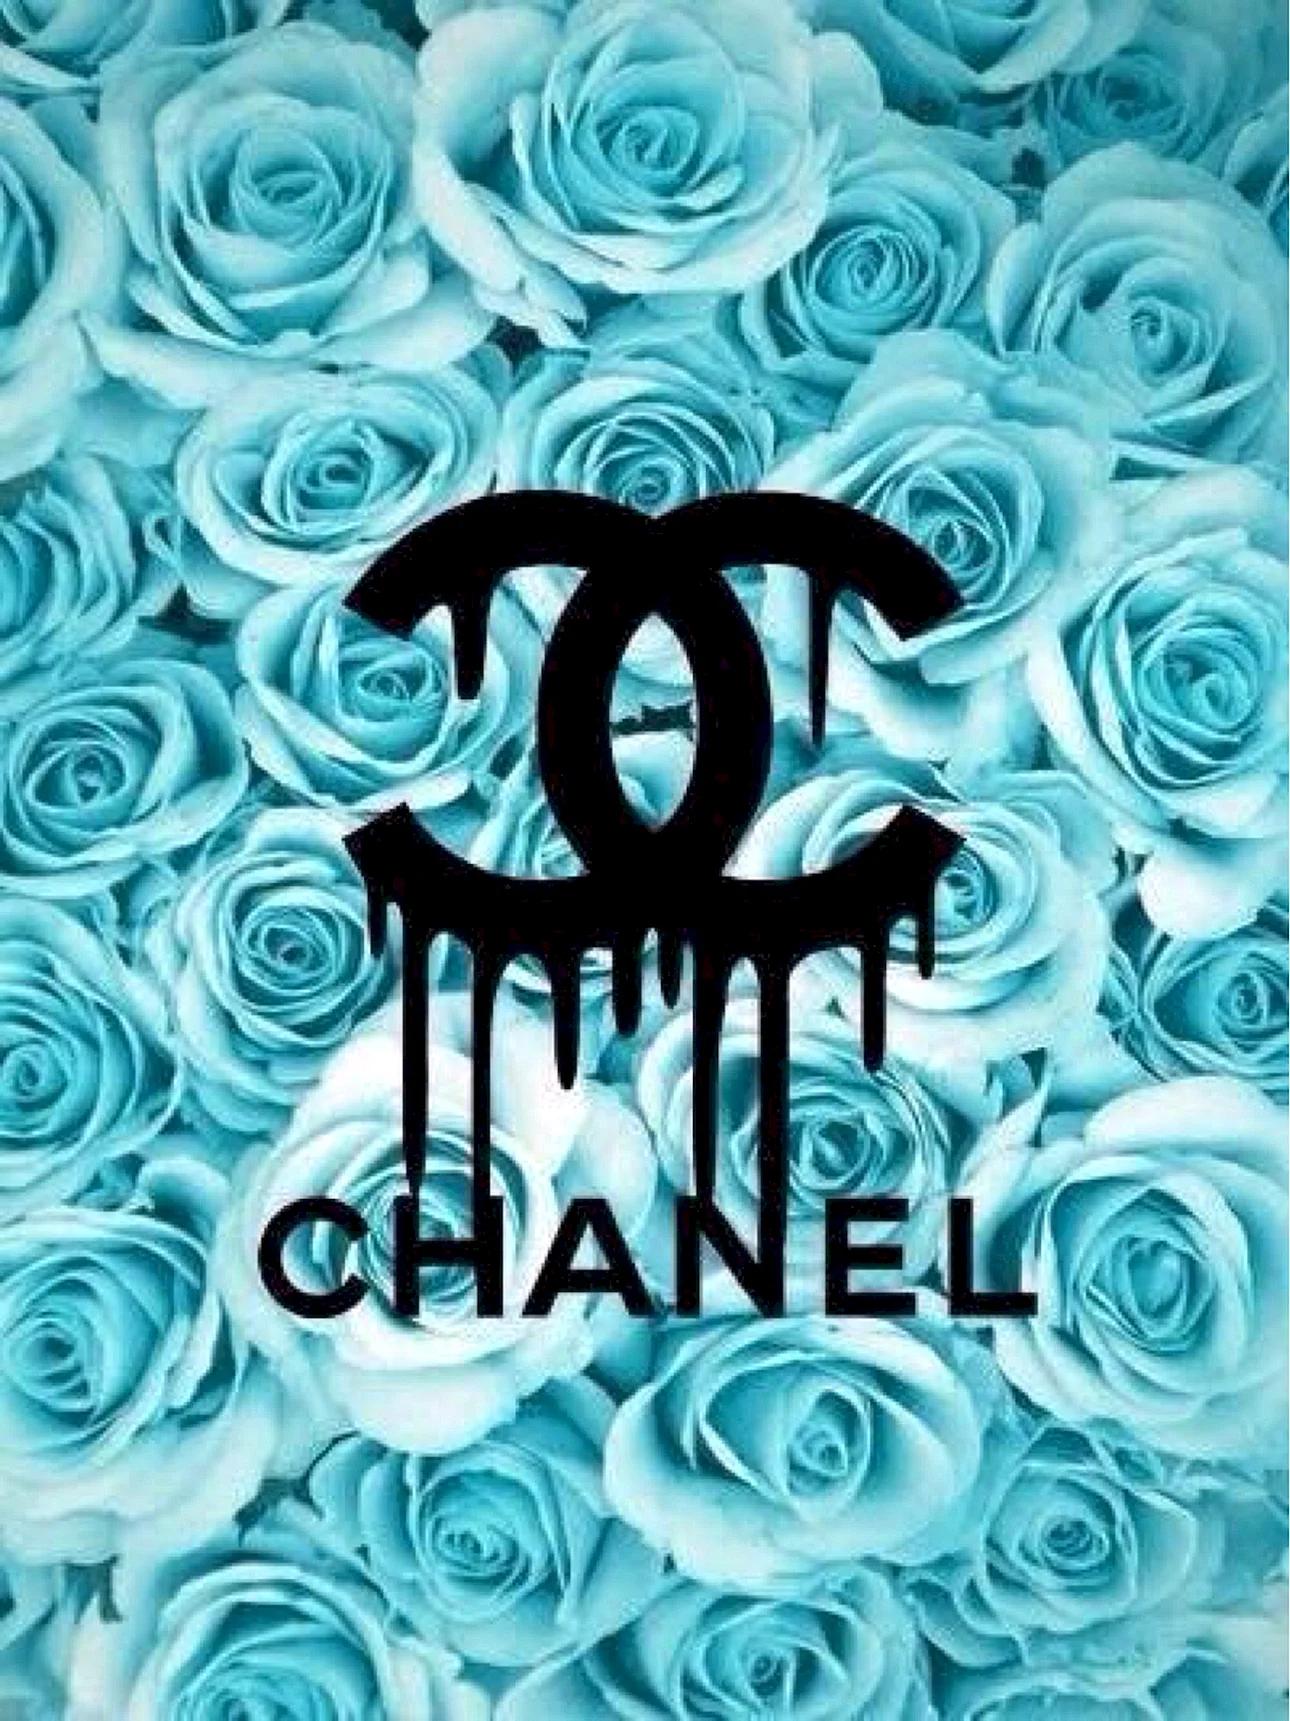 Chanel Fond Wallpaper For iPhone